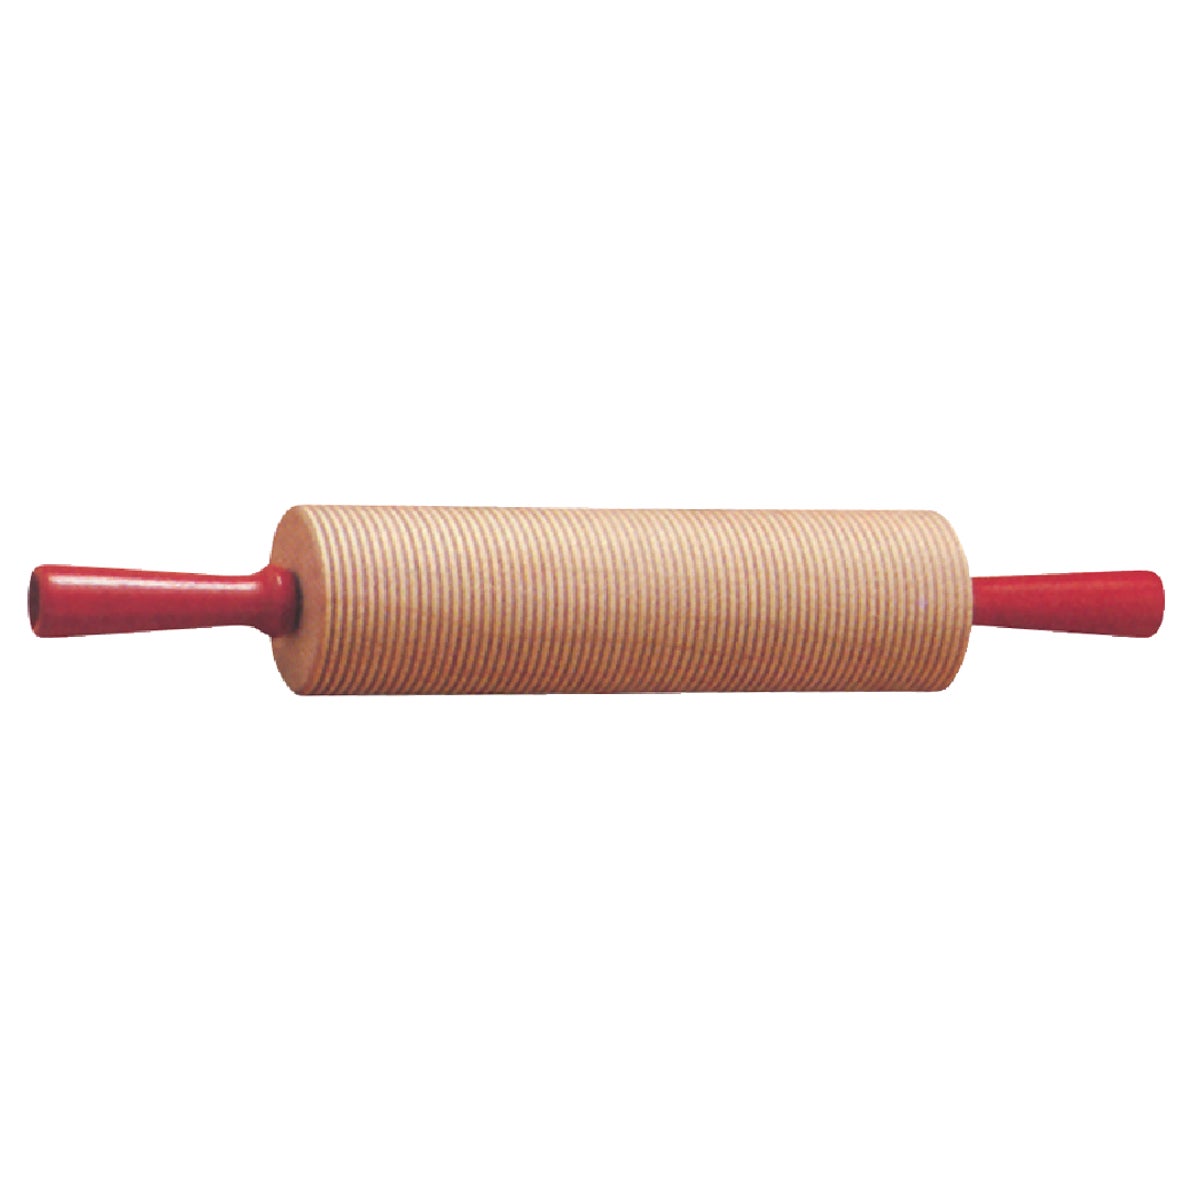 Item 669067, Corrugated (grooved) rolling pin with easy rolling action helps remove air 